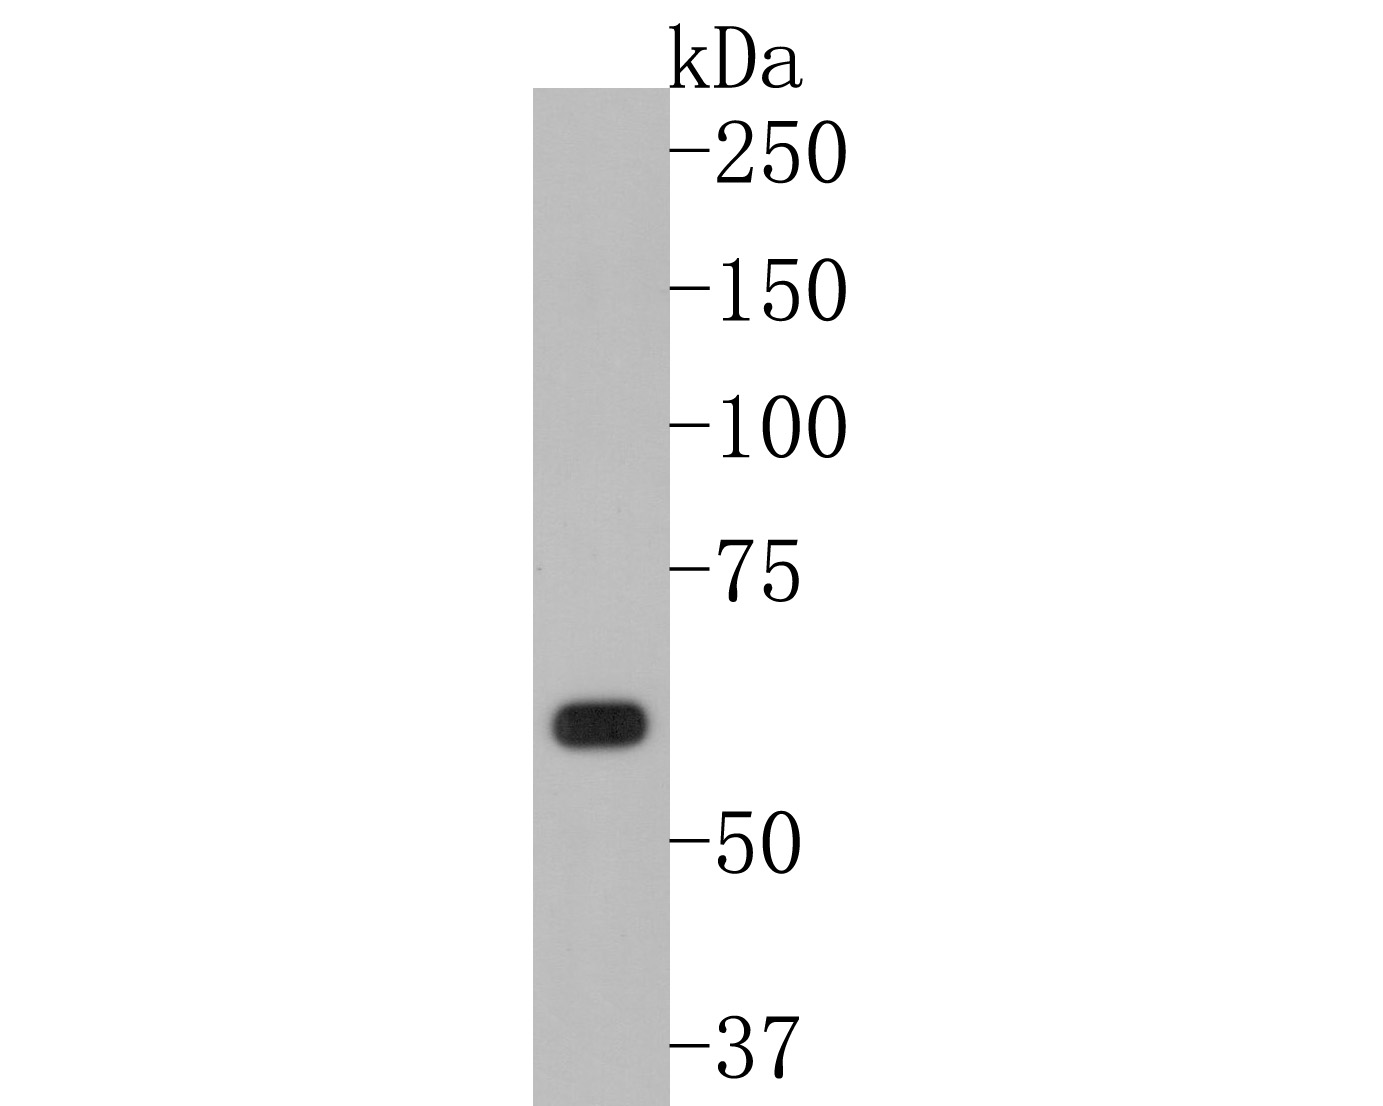 Western blot analysis of WASP/Wiskott-Aldrich syndrome protein on rat bone marrow tissue lysates. Proteins were transferred to a PVDF membrane and blocked with 5% BSA in PBS for 1 hour at room temperature. The primary antibody (HA500490, 1/1,000) was used in 5% BSA at room temperature for 2 hours. Goat Anti-Rabbit IgG - HRP Secondary Antibody (HA1001) at 1:200,000 dilution was used for 1 hour at room temperature.